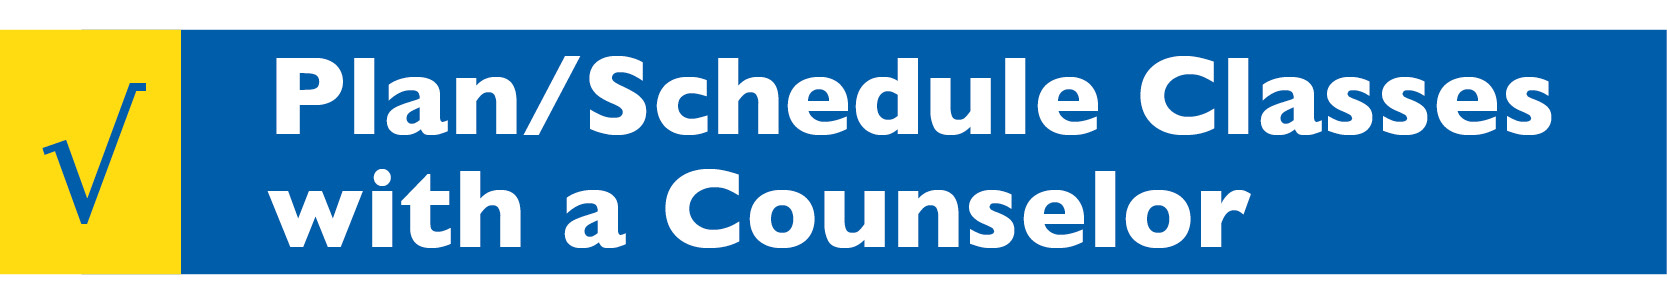 Plan Schedule Classes with a Counselor